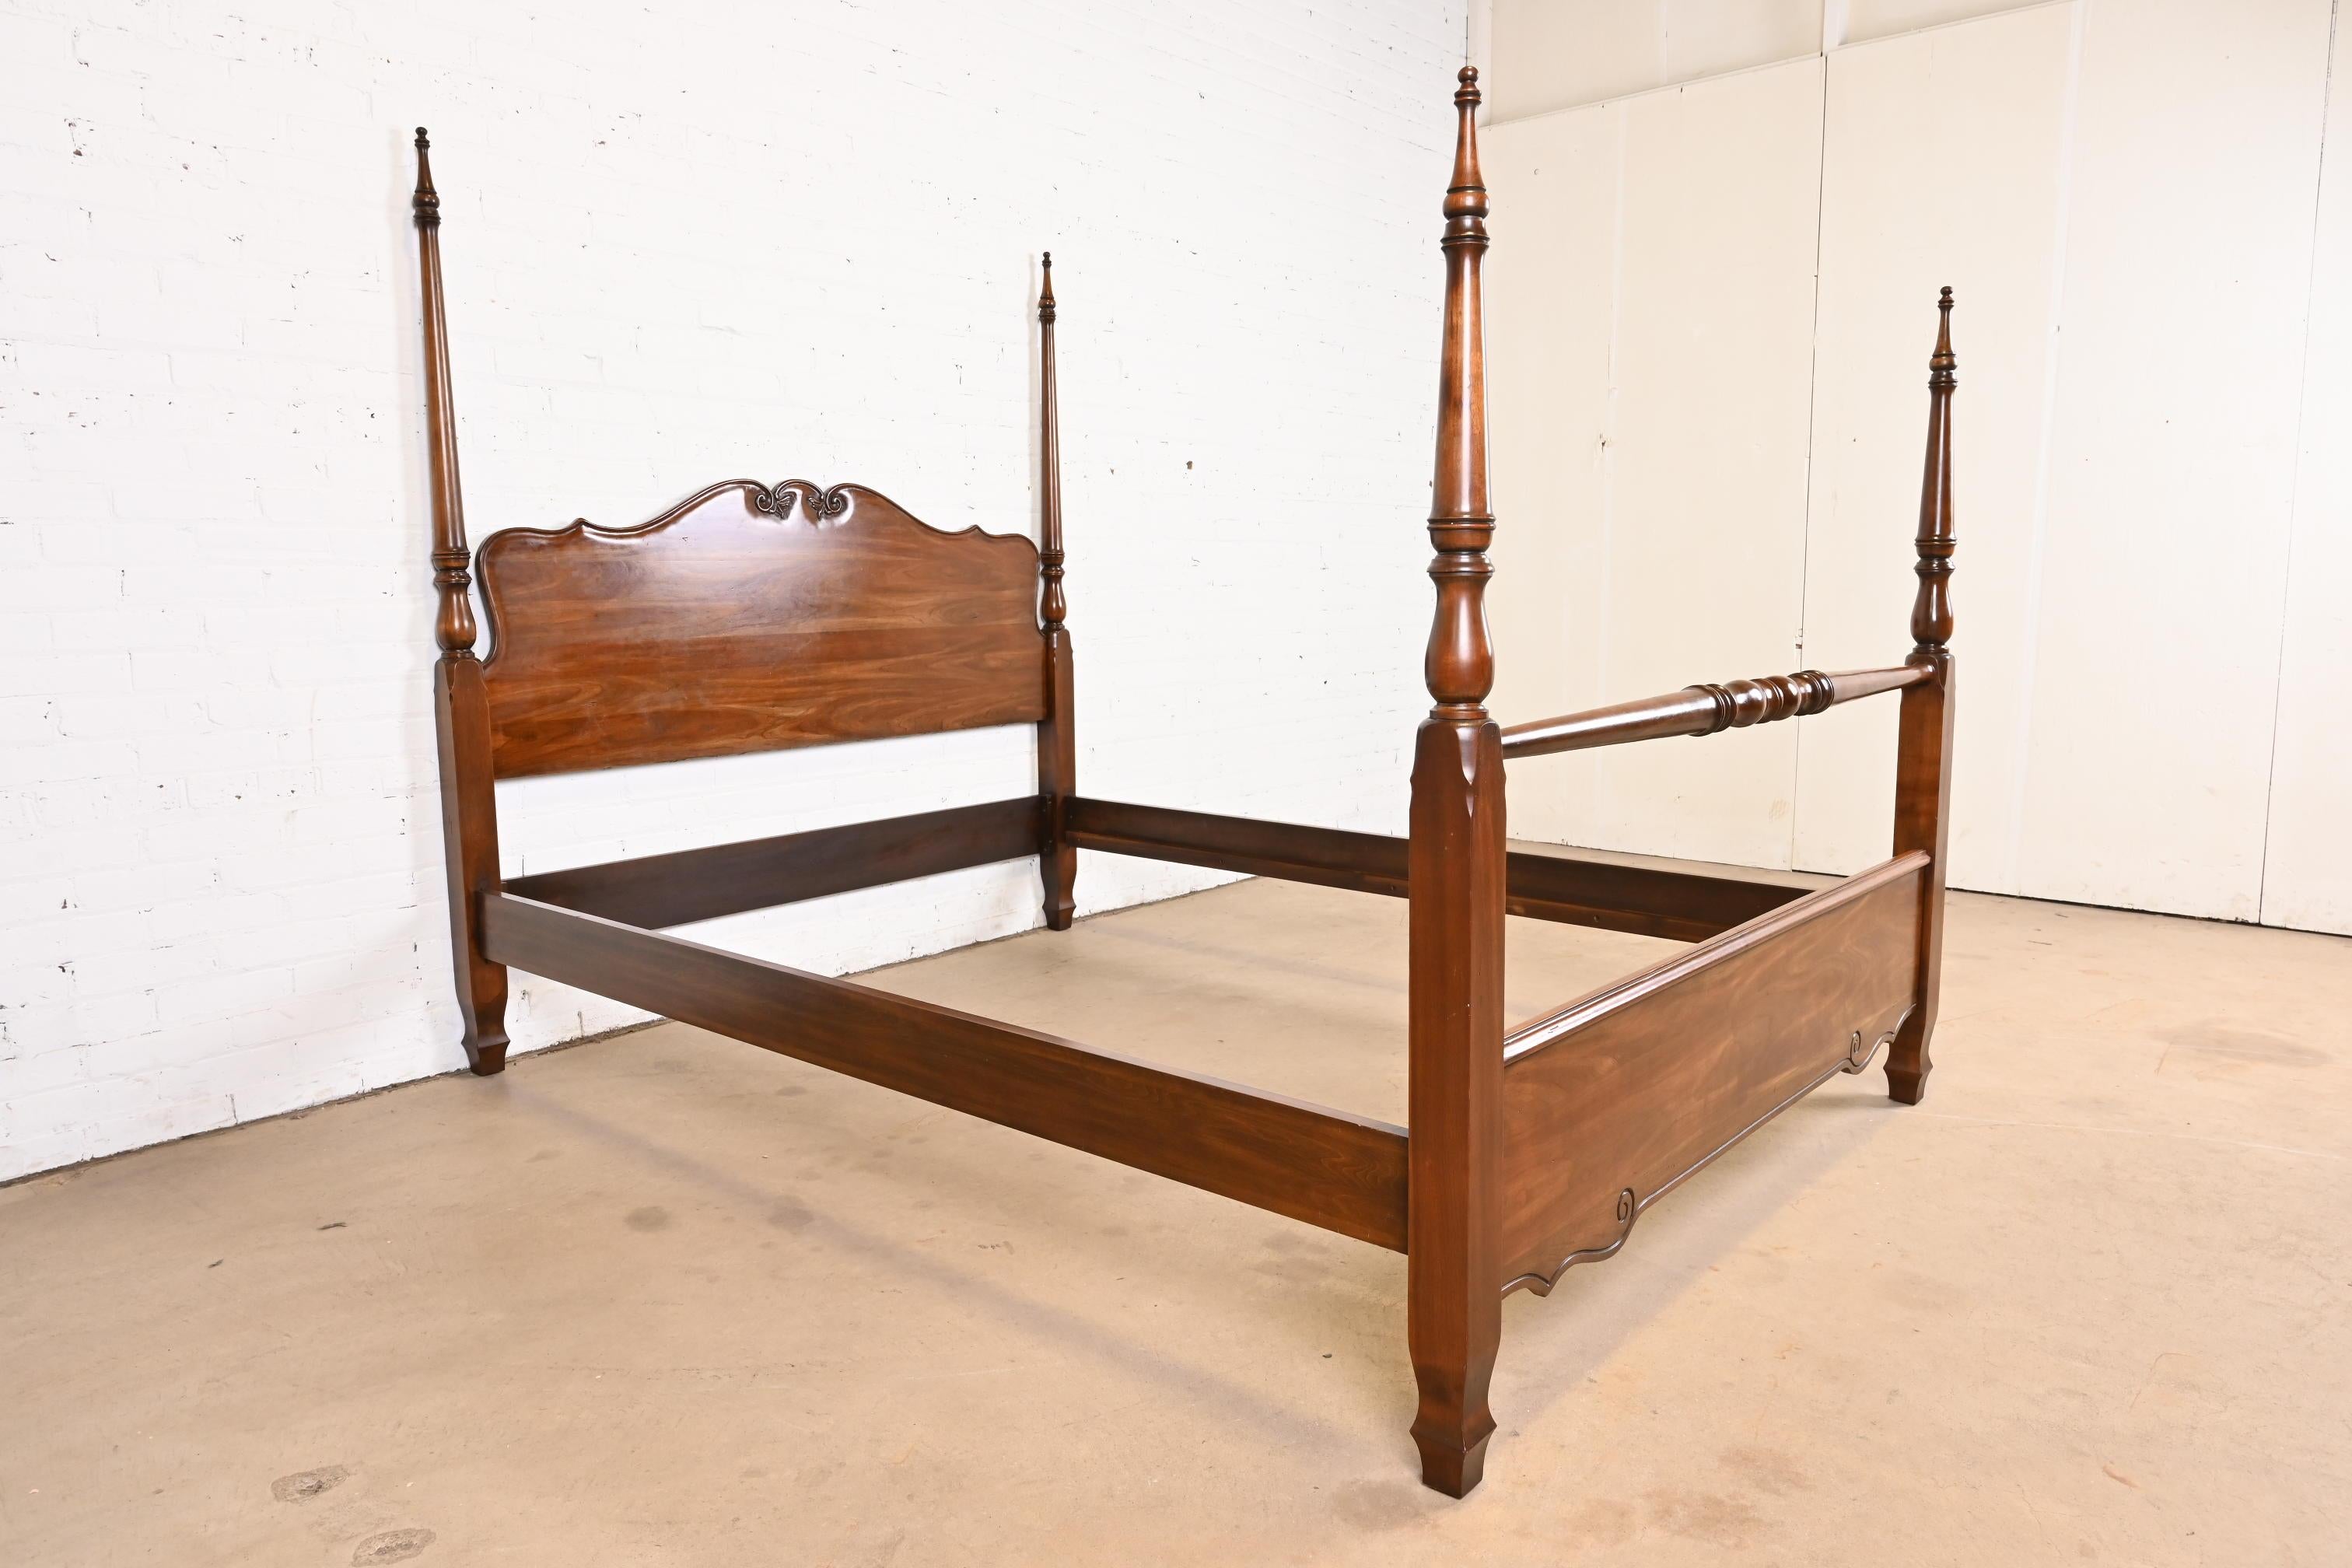 20th Century Harden Furniture French Provincial Carved Cherry Wood Queen Size Poster Bed